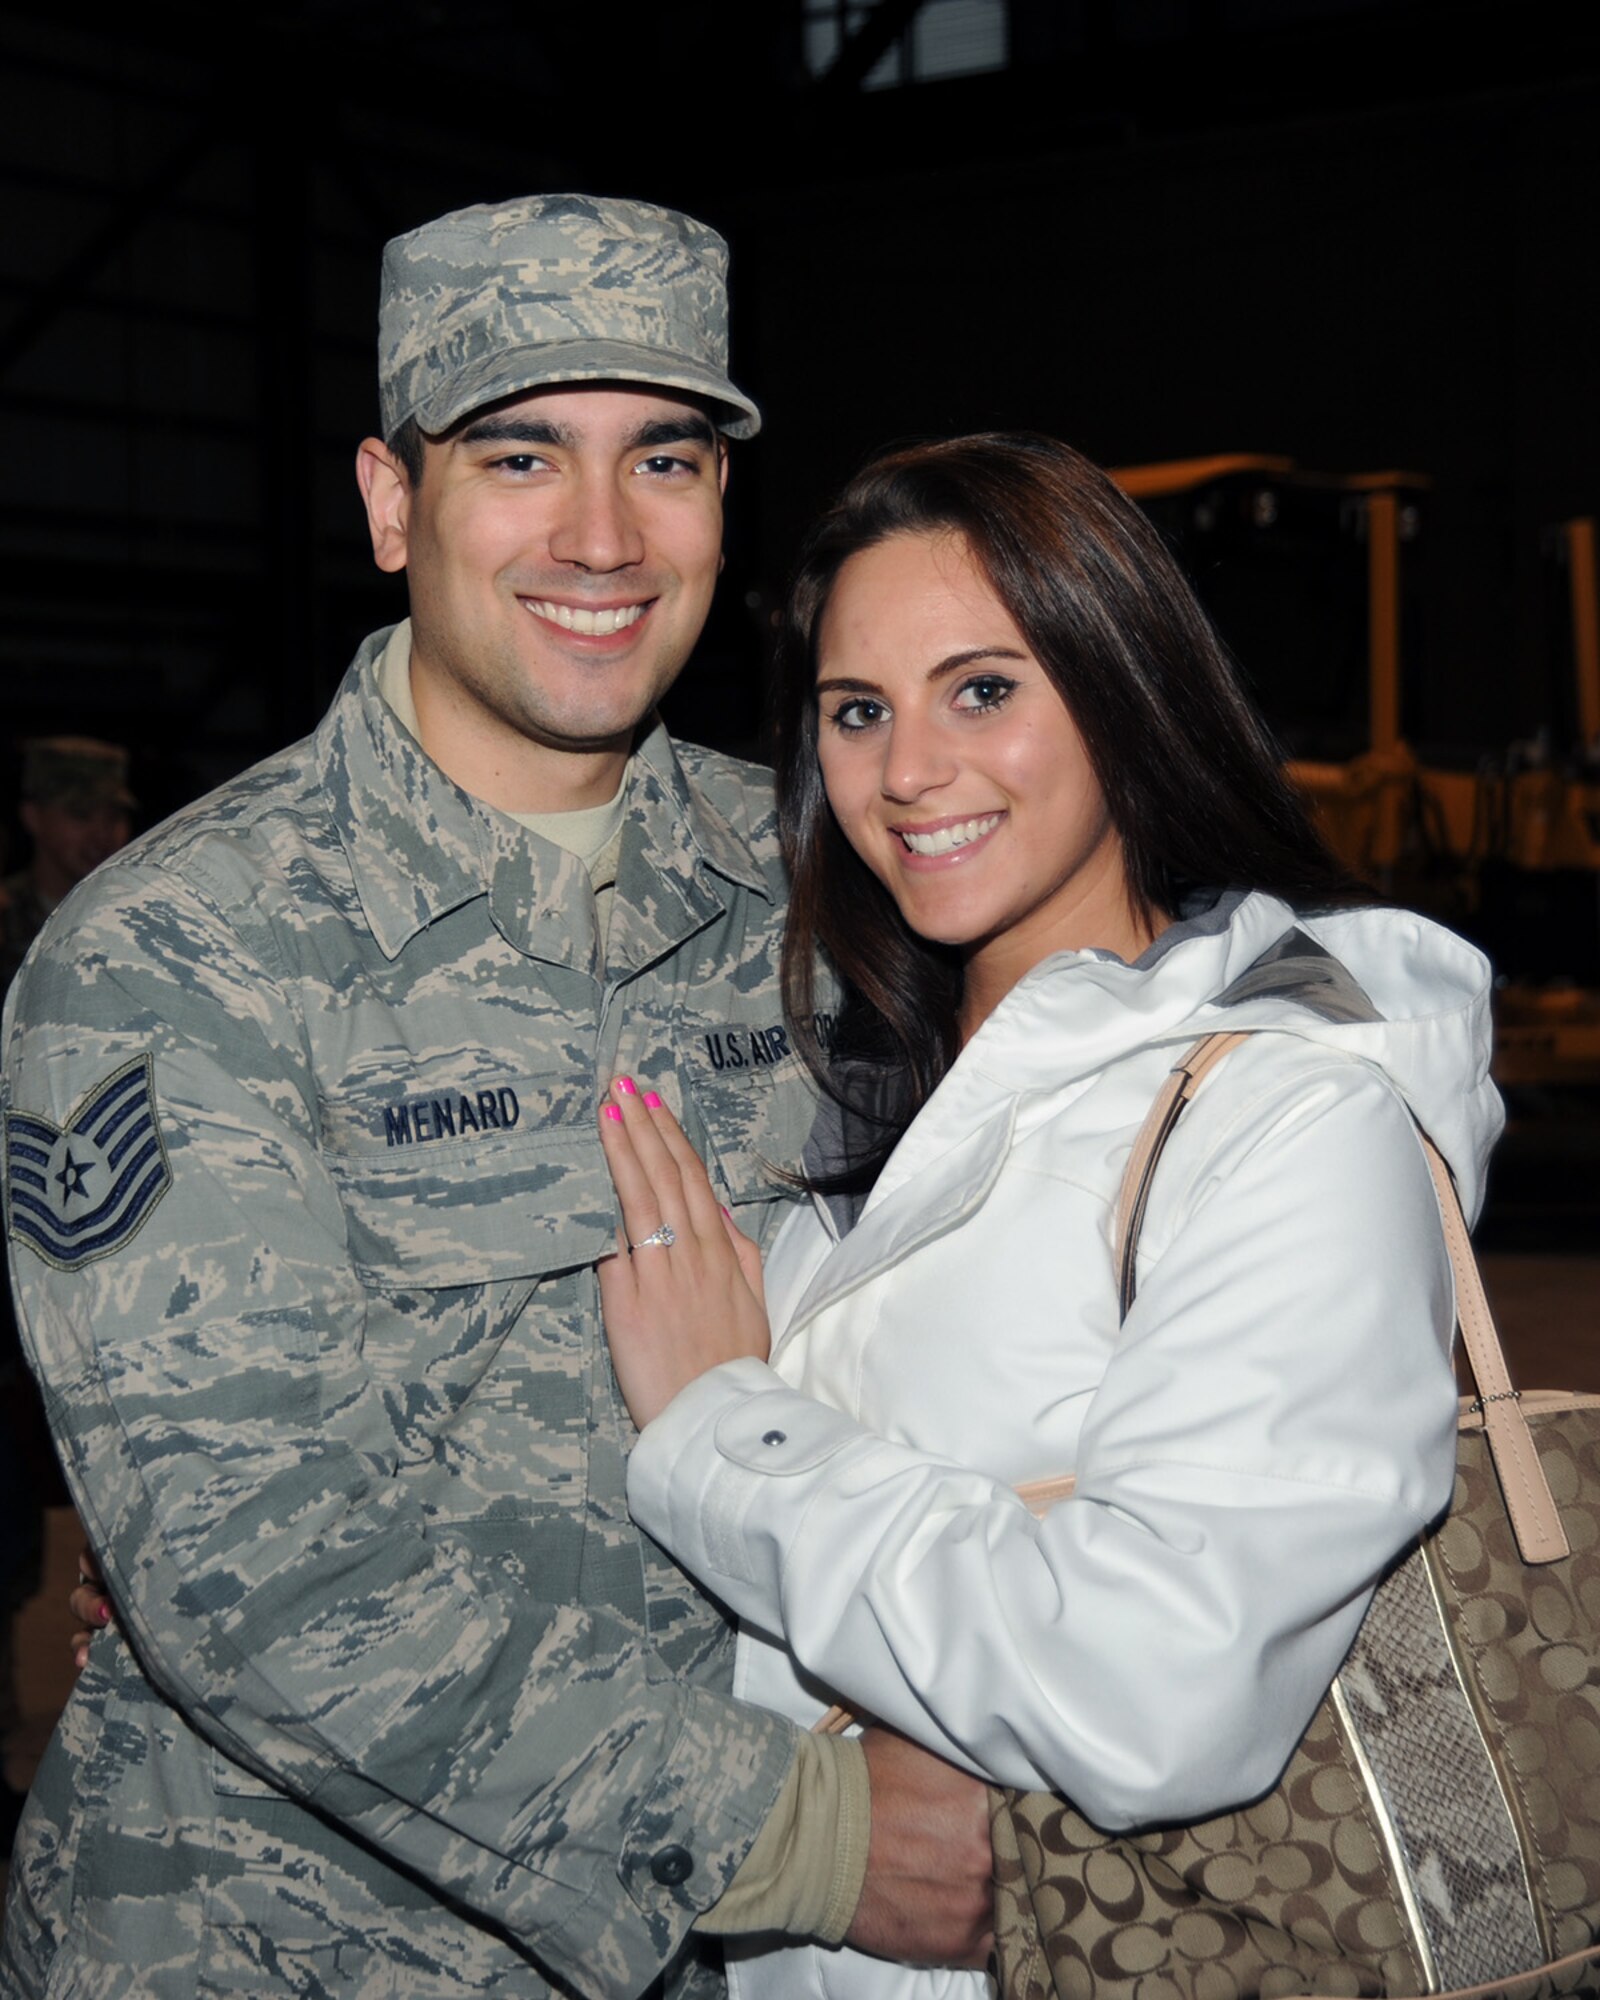 Tech. Sgt. Nicholas Menard poses with his fiancée following the mobilization ceremony held at the Portland Air National Guard Base, Ore., March 1. (Air National Guard photo by Master Sgt. Shelly Davison, 142nd Fighter Wing Public Affairs/Released)